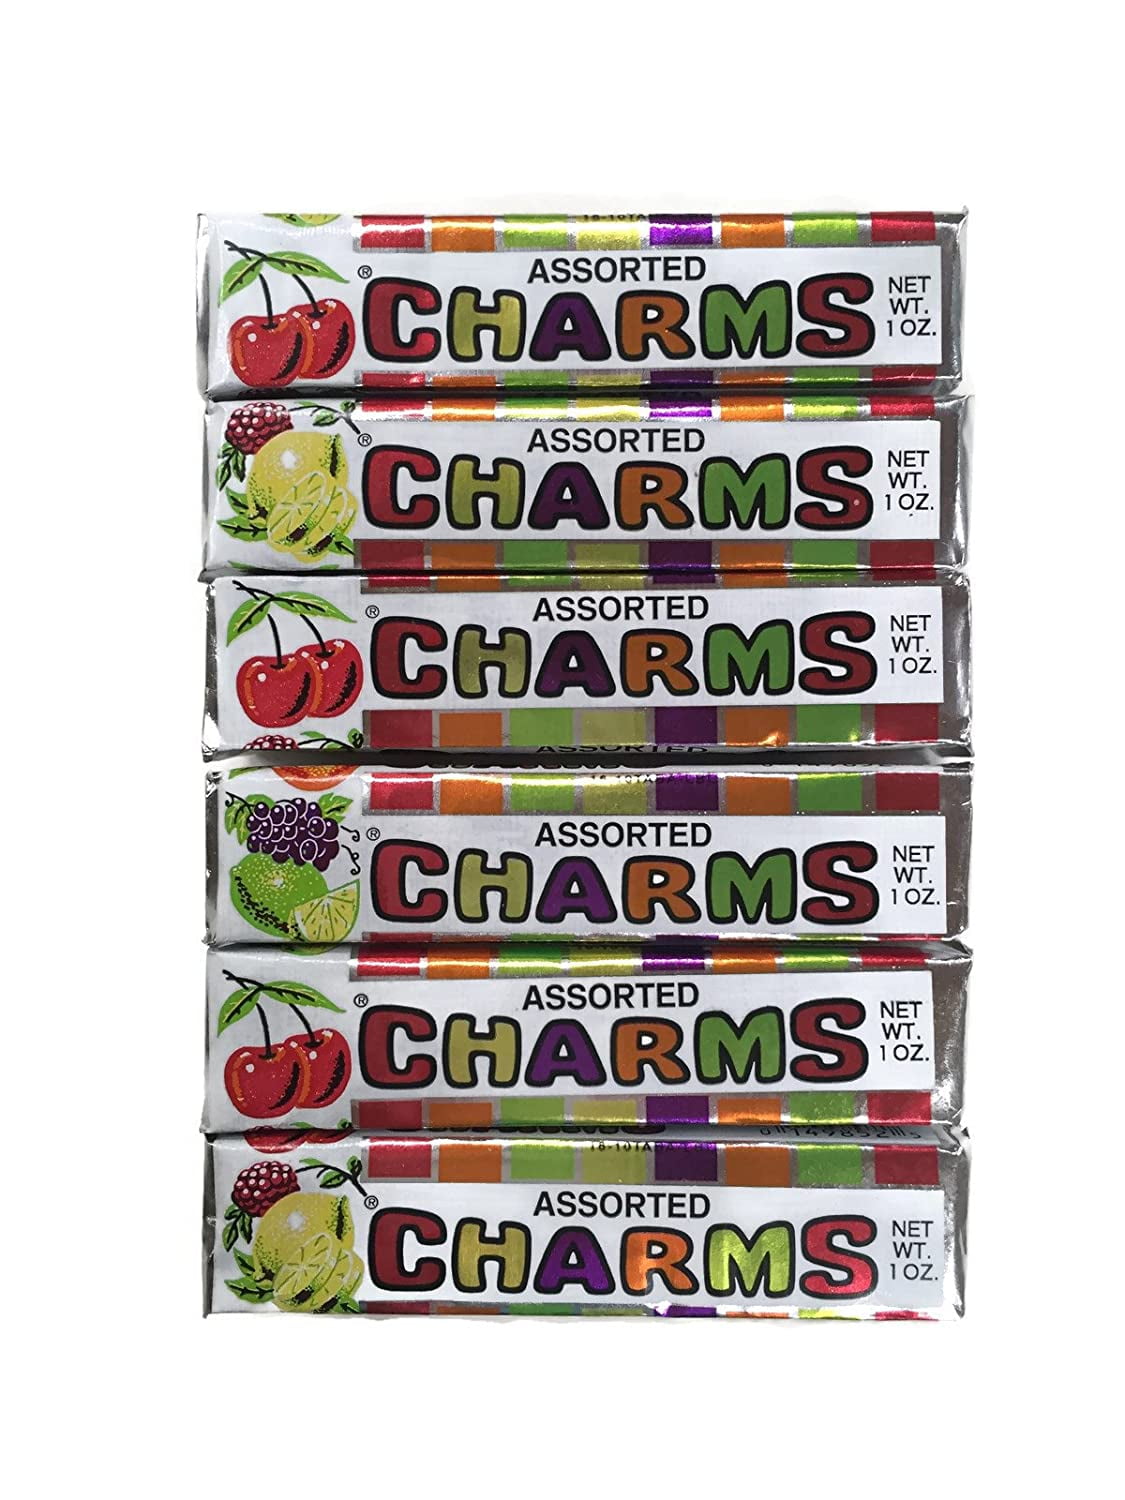 Charms Assorted Squares 20 Pk., Candy & Chocolate, Food & Gifts